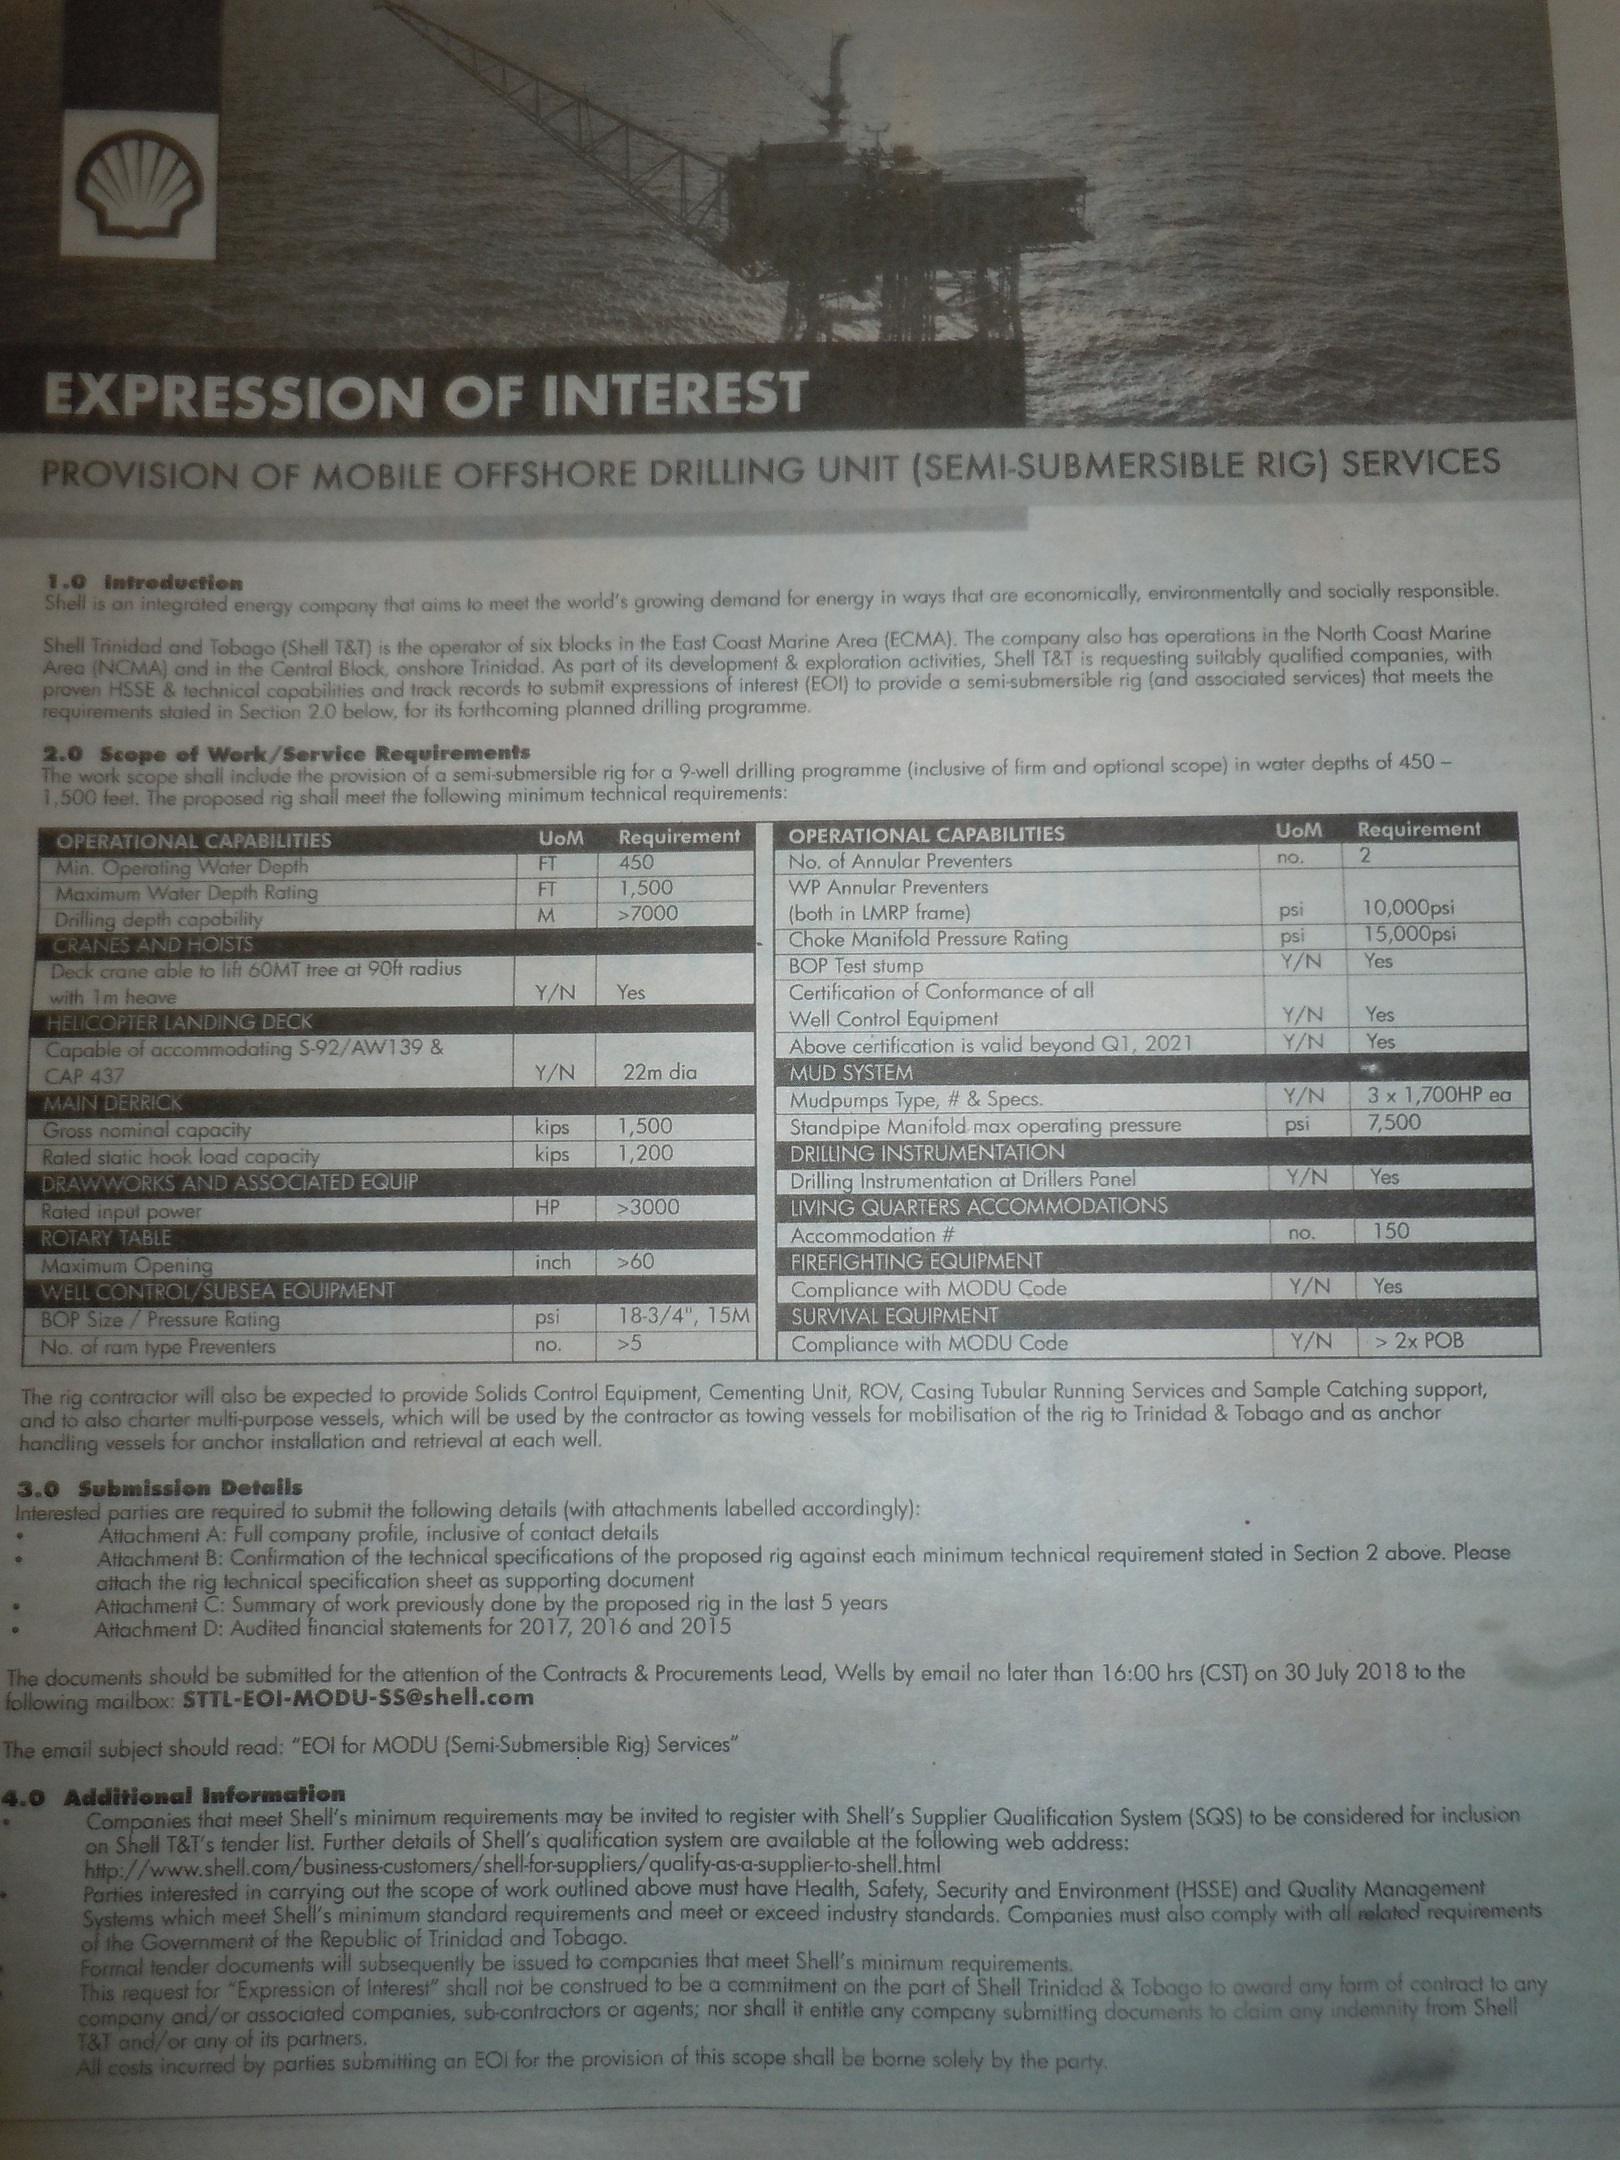 Expression of Interest by Shell for a Mobile Offshore Drilling Unit for its operation in Trinidad and Tobago